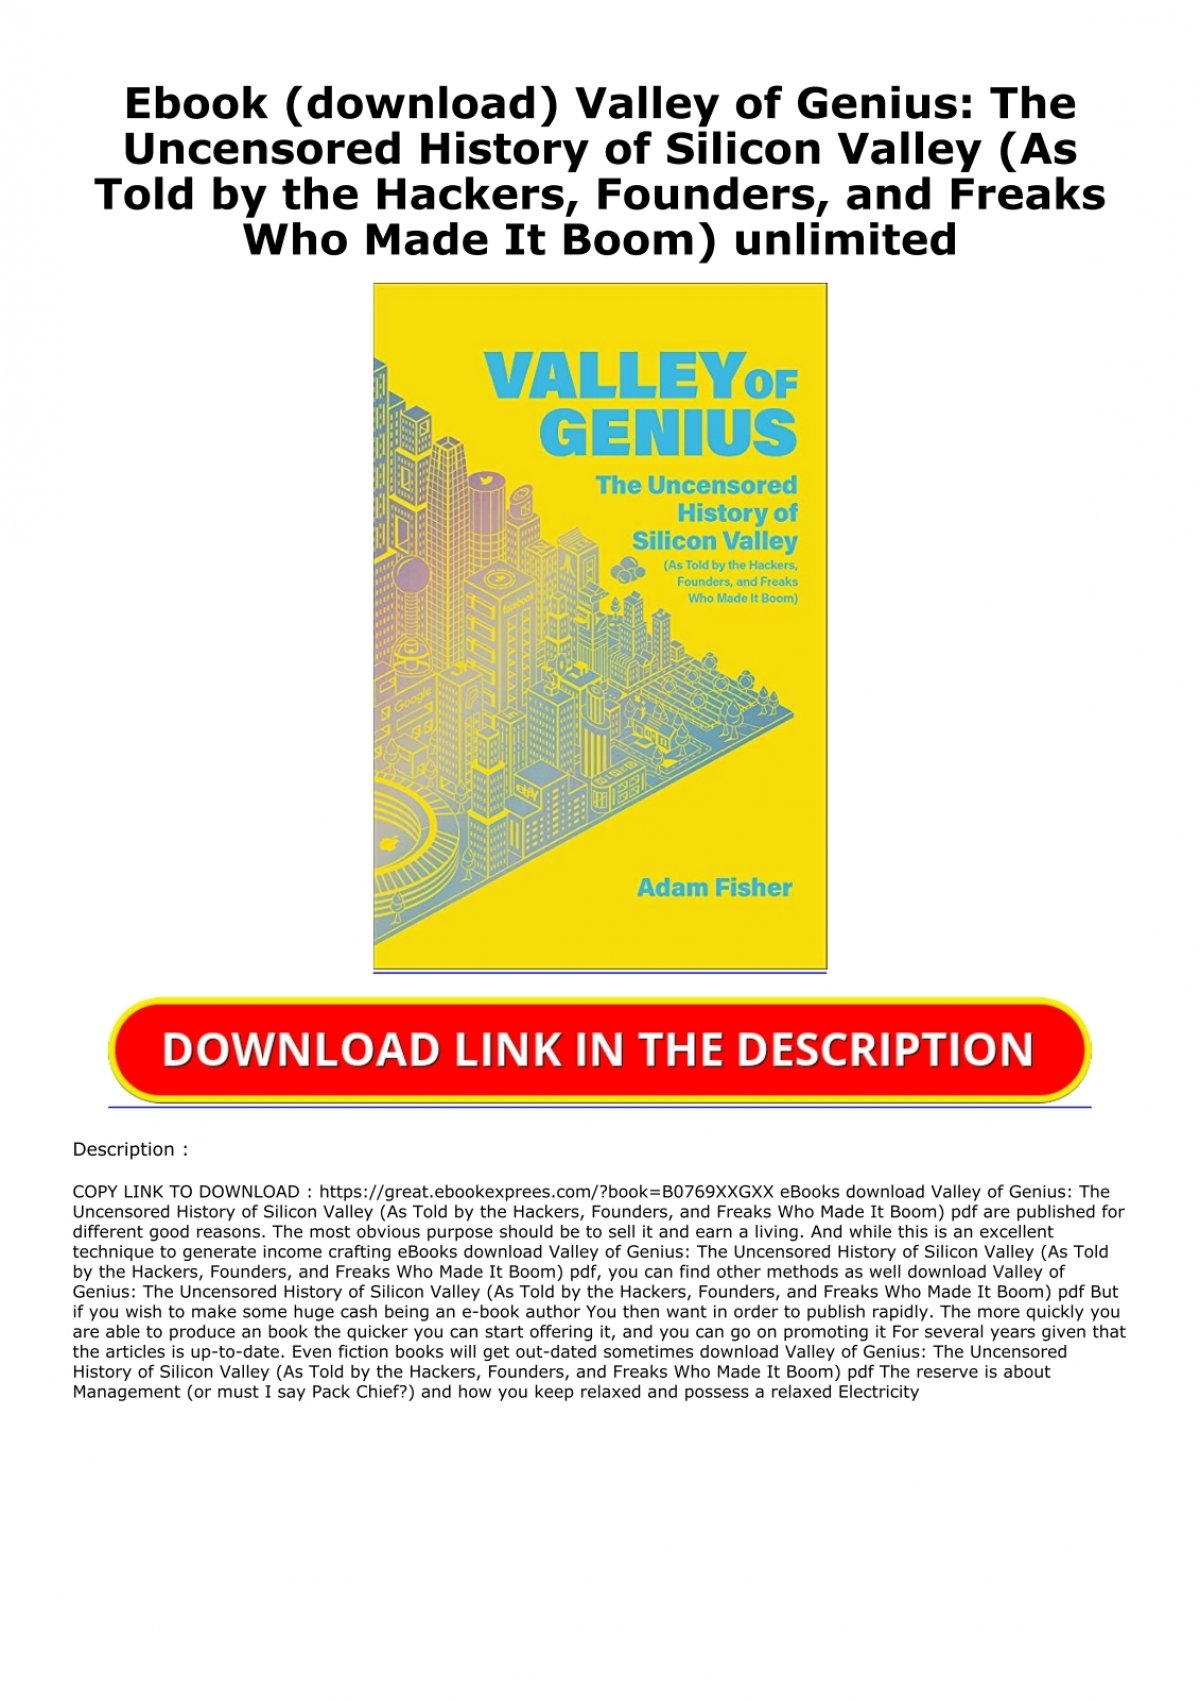 Ebook Download Valley Of Genius The Uncensored History Of Silicon Valley As Told By The